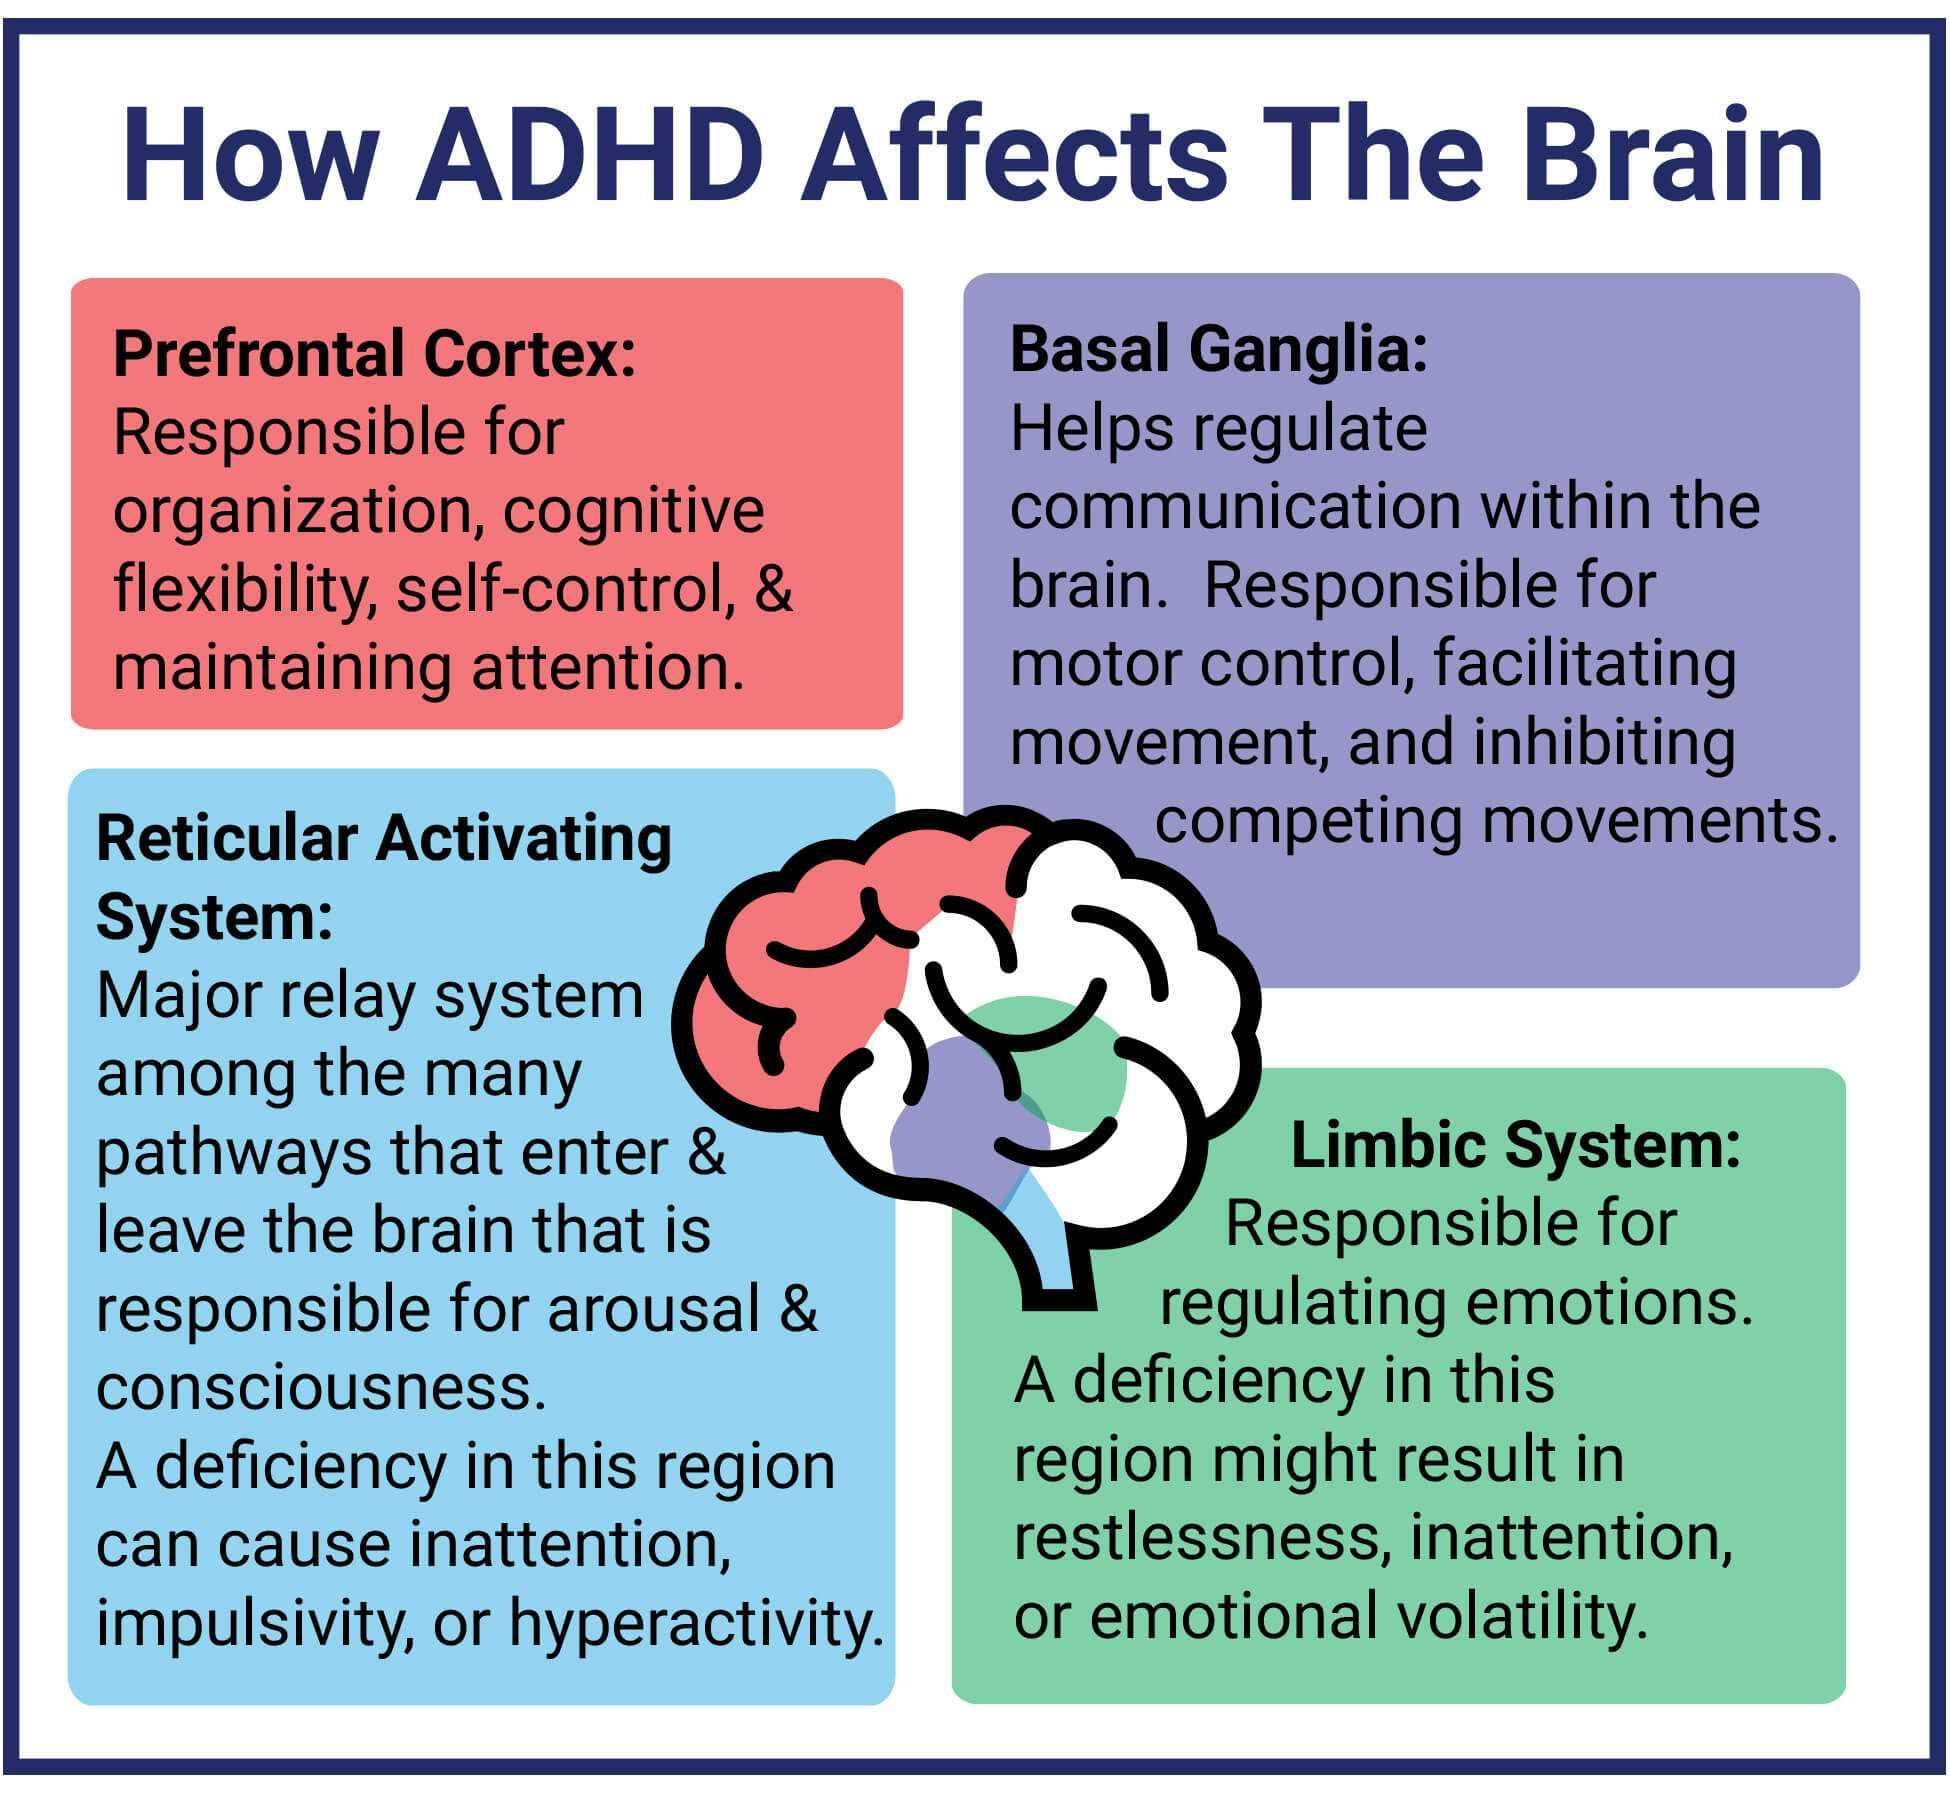 What are the 9 main symptoms of ADHD?